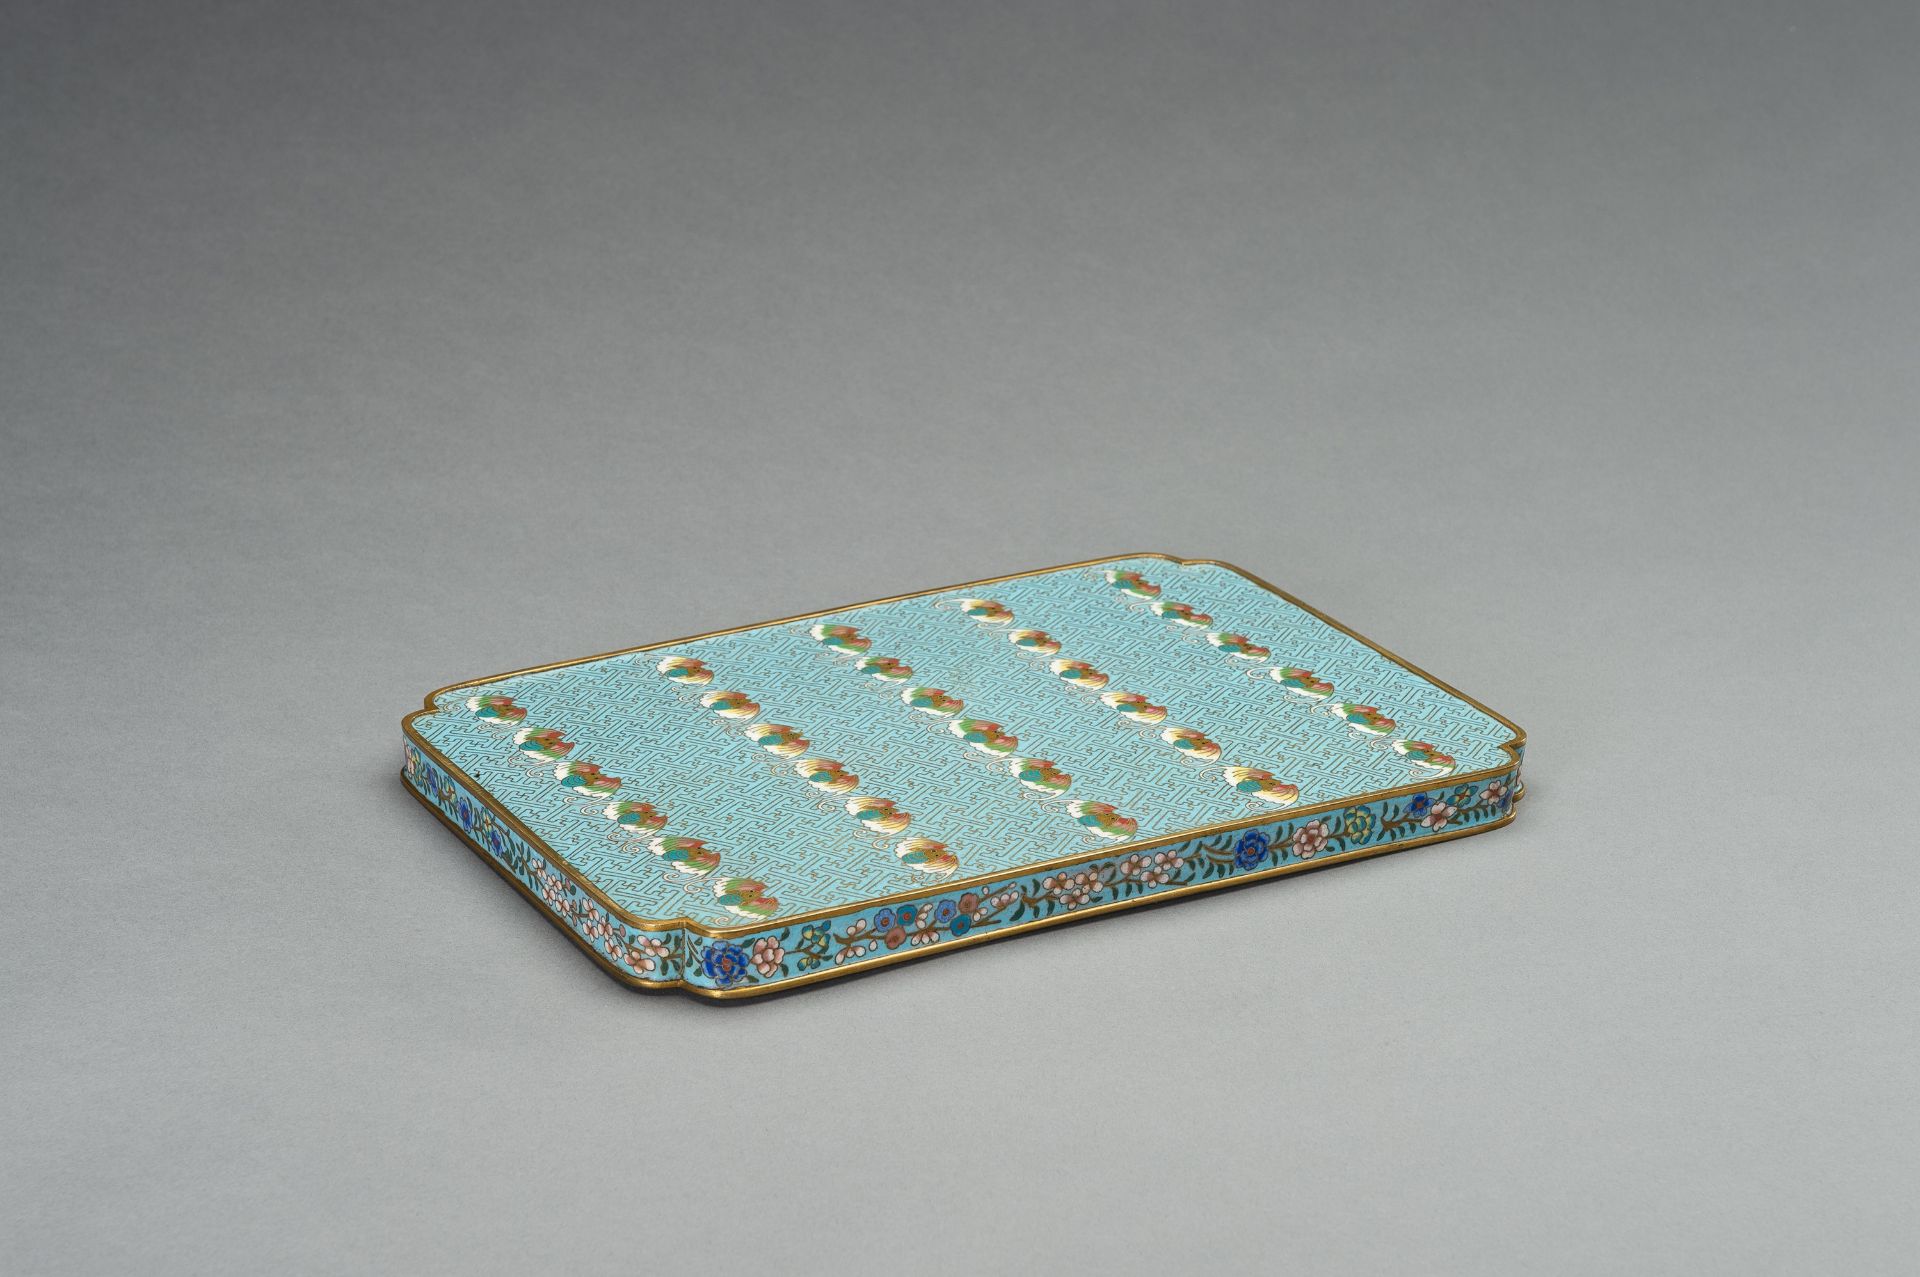 A FINE CLOISONNE ENAMEL TRAY, 19th CENTURY - Image 8 of 11